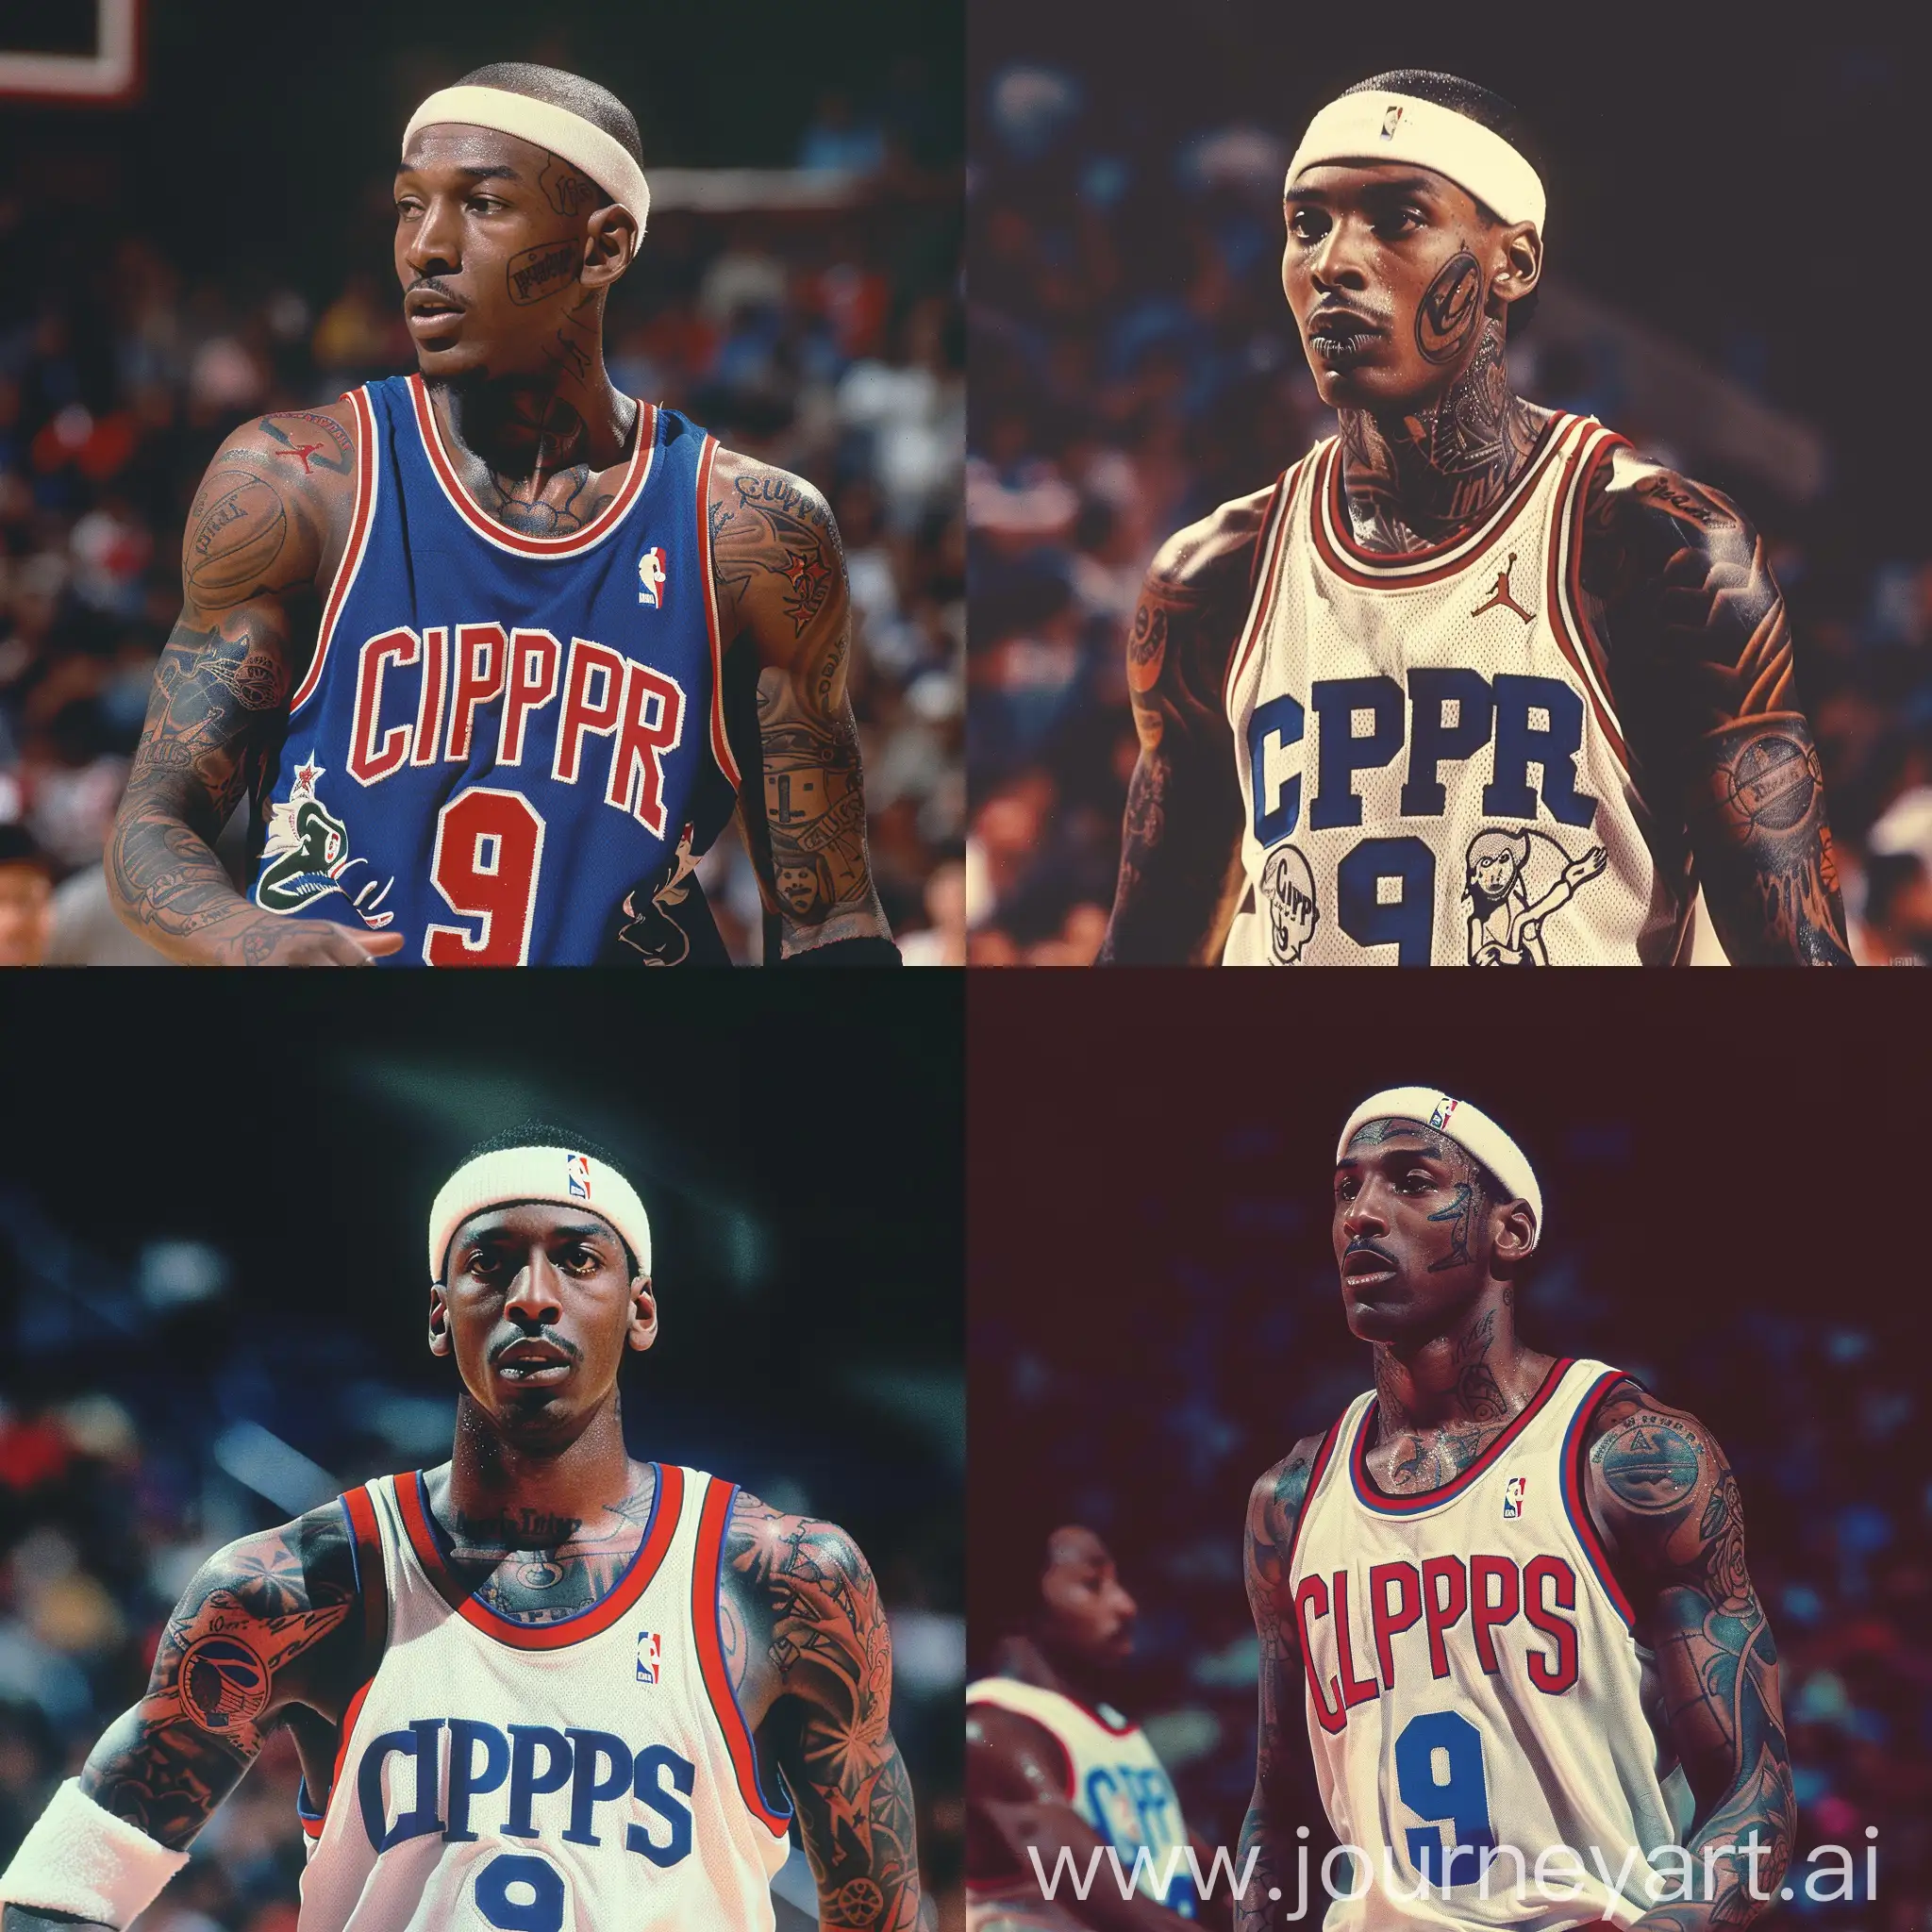 A 1980s photograph of a young Michael jordan,with tattoos,in a basketball game,wearing a “Clippers” jersey with the number “9”,with a white headband.